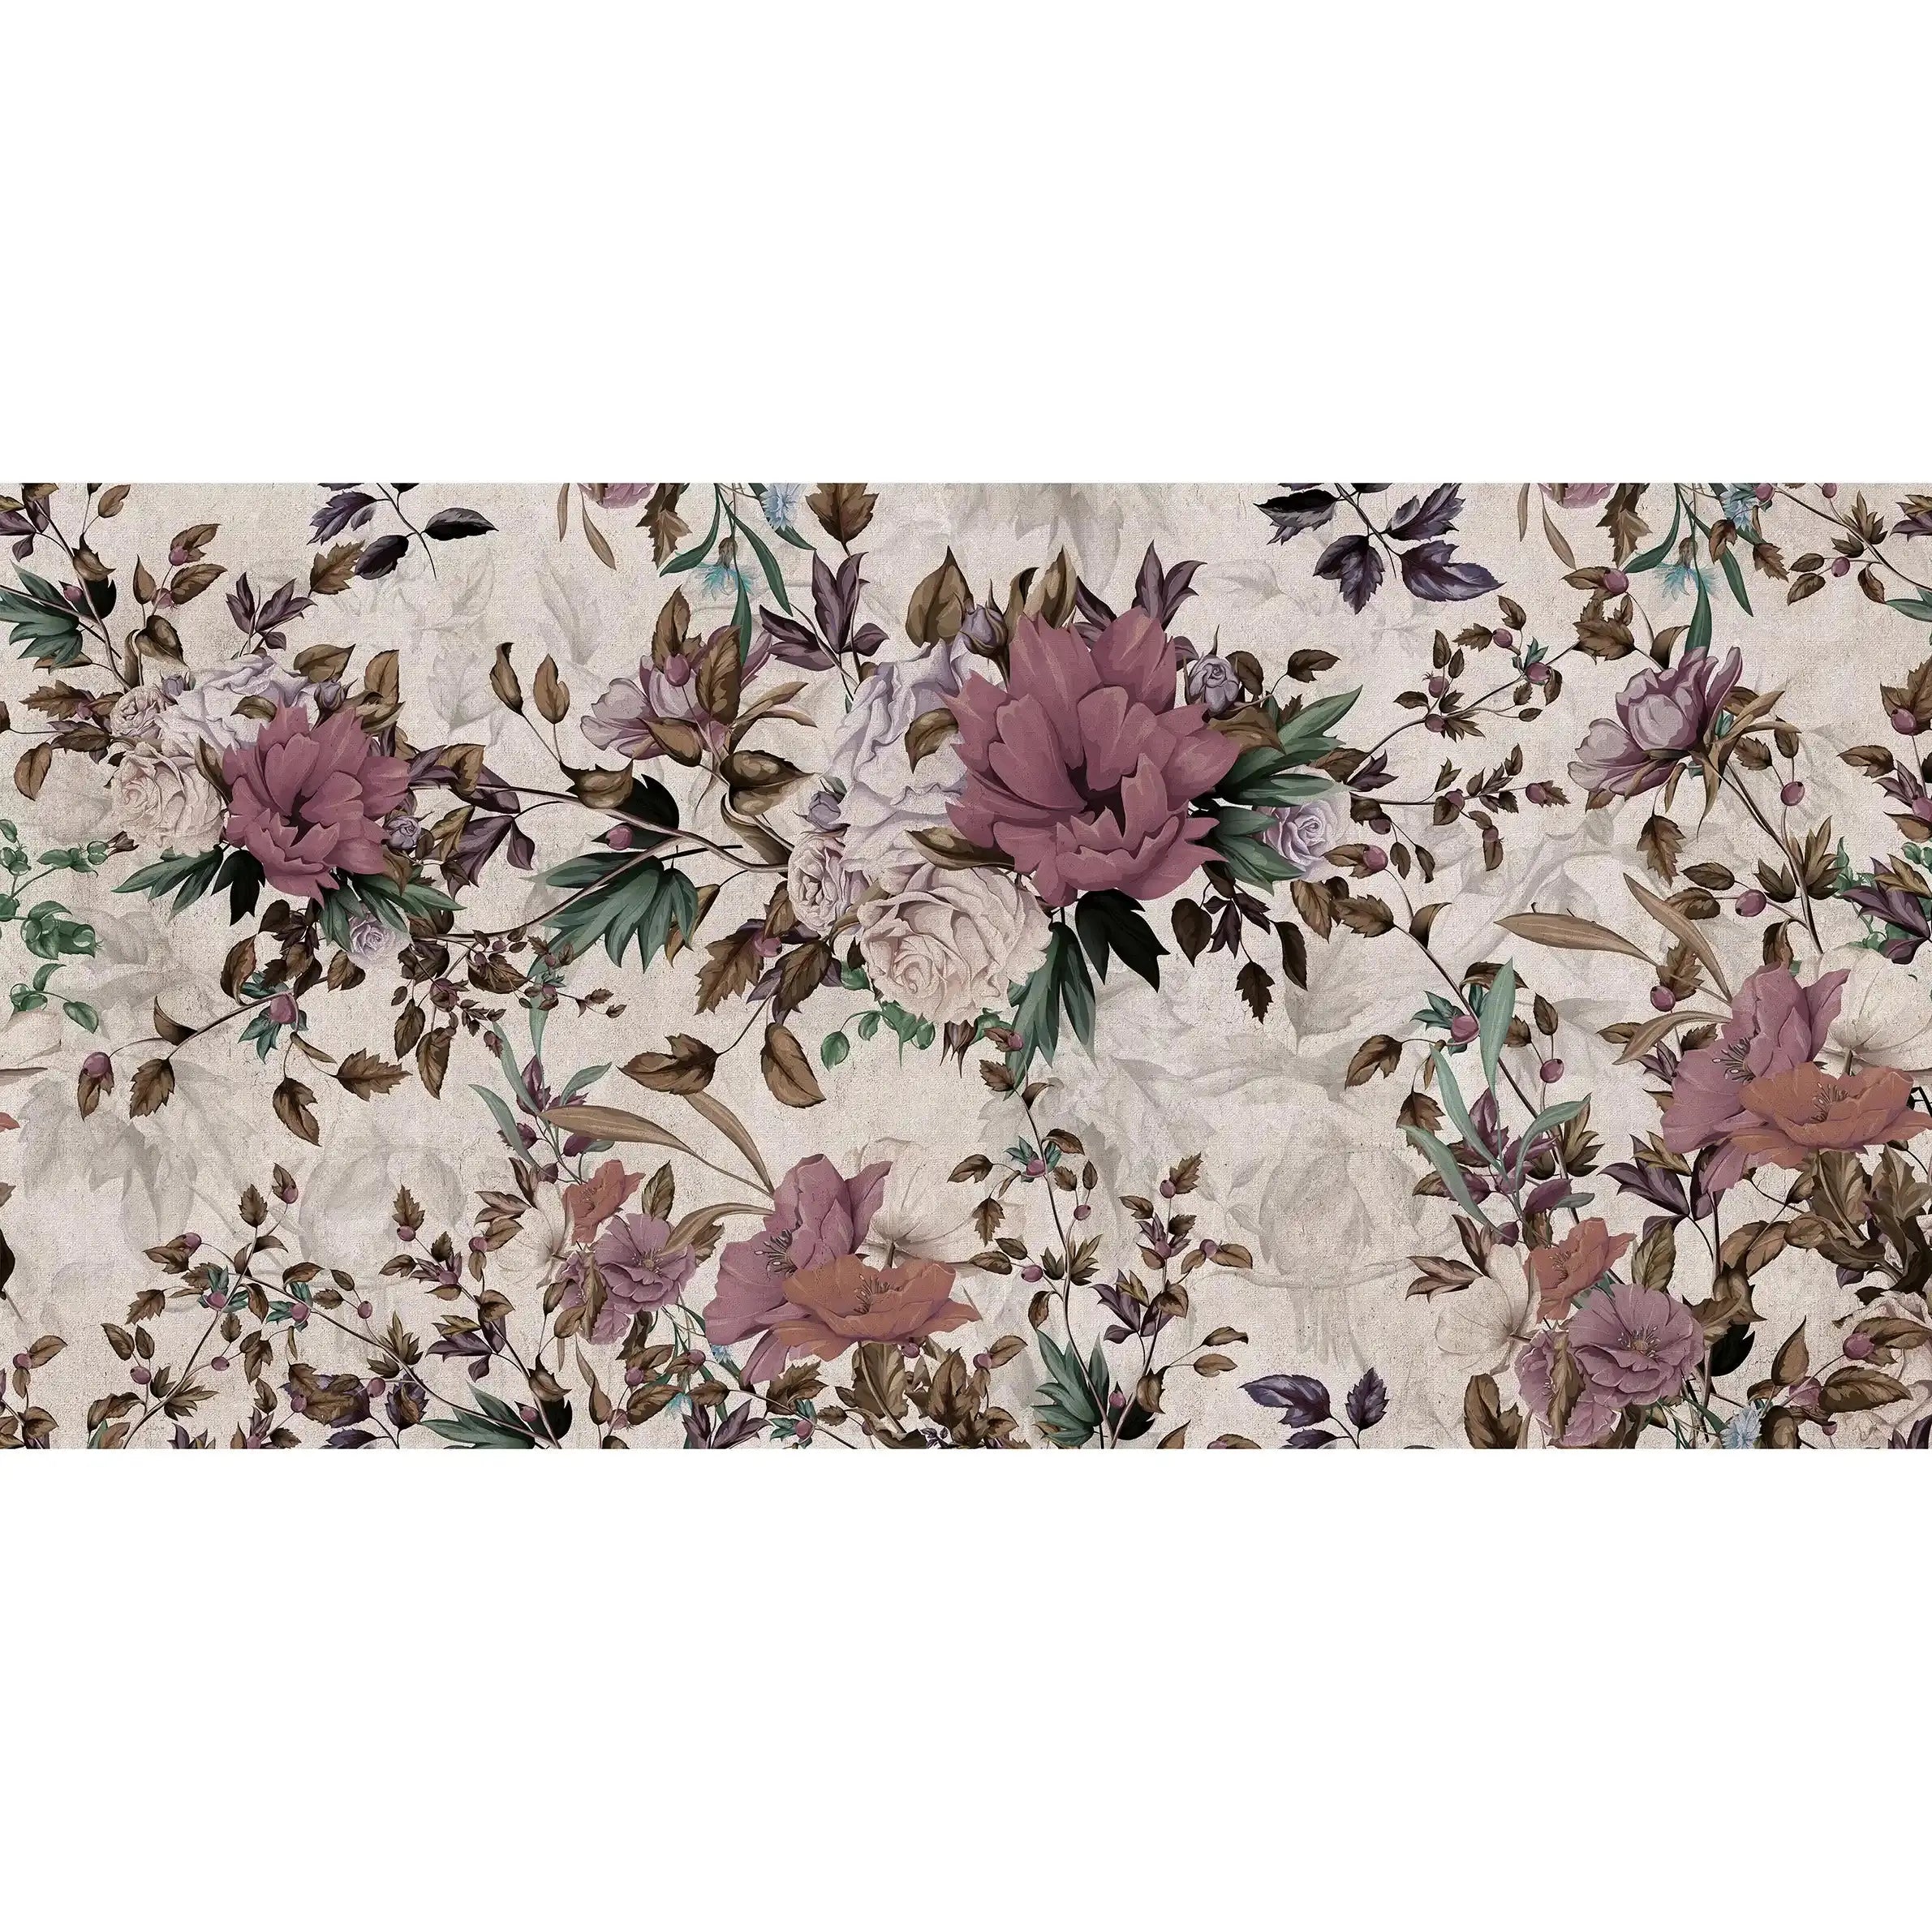 3045-C / Peel and Stick Wallpaper Floral - Large Purple Flowers Design, Adhesive Decorative Paper for Bedroom, Kitchen, and Bathroom - Artevella